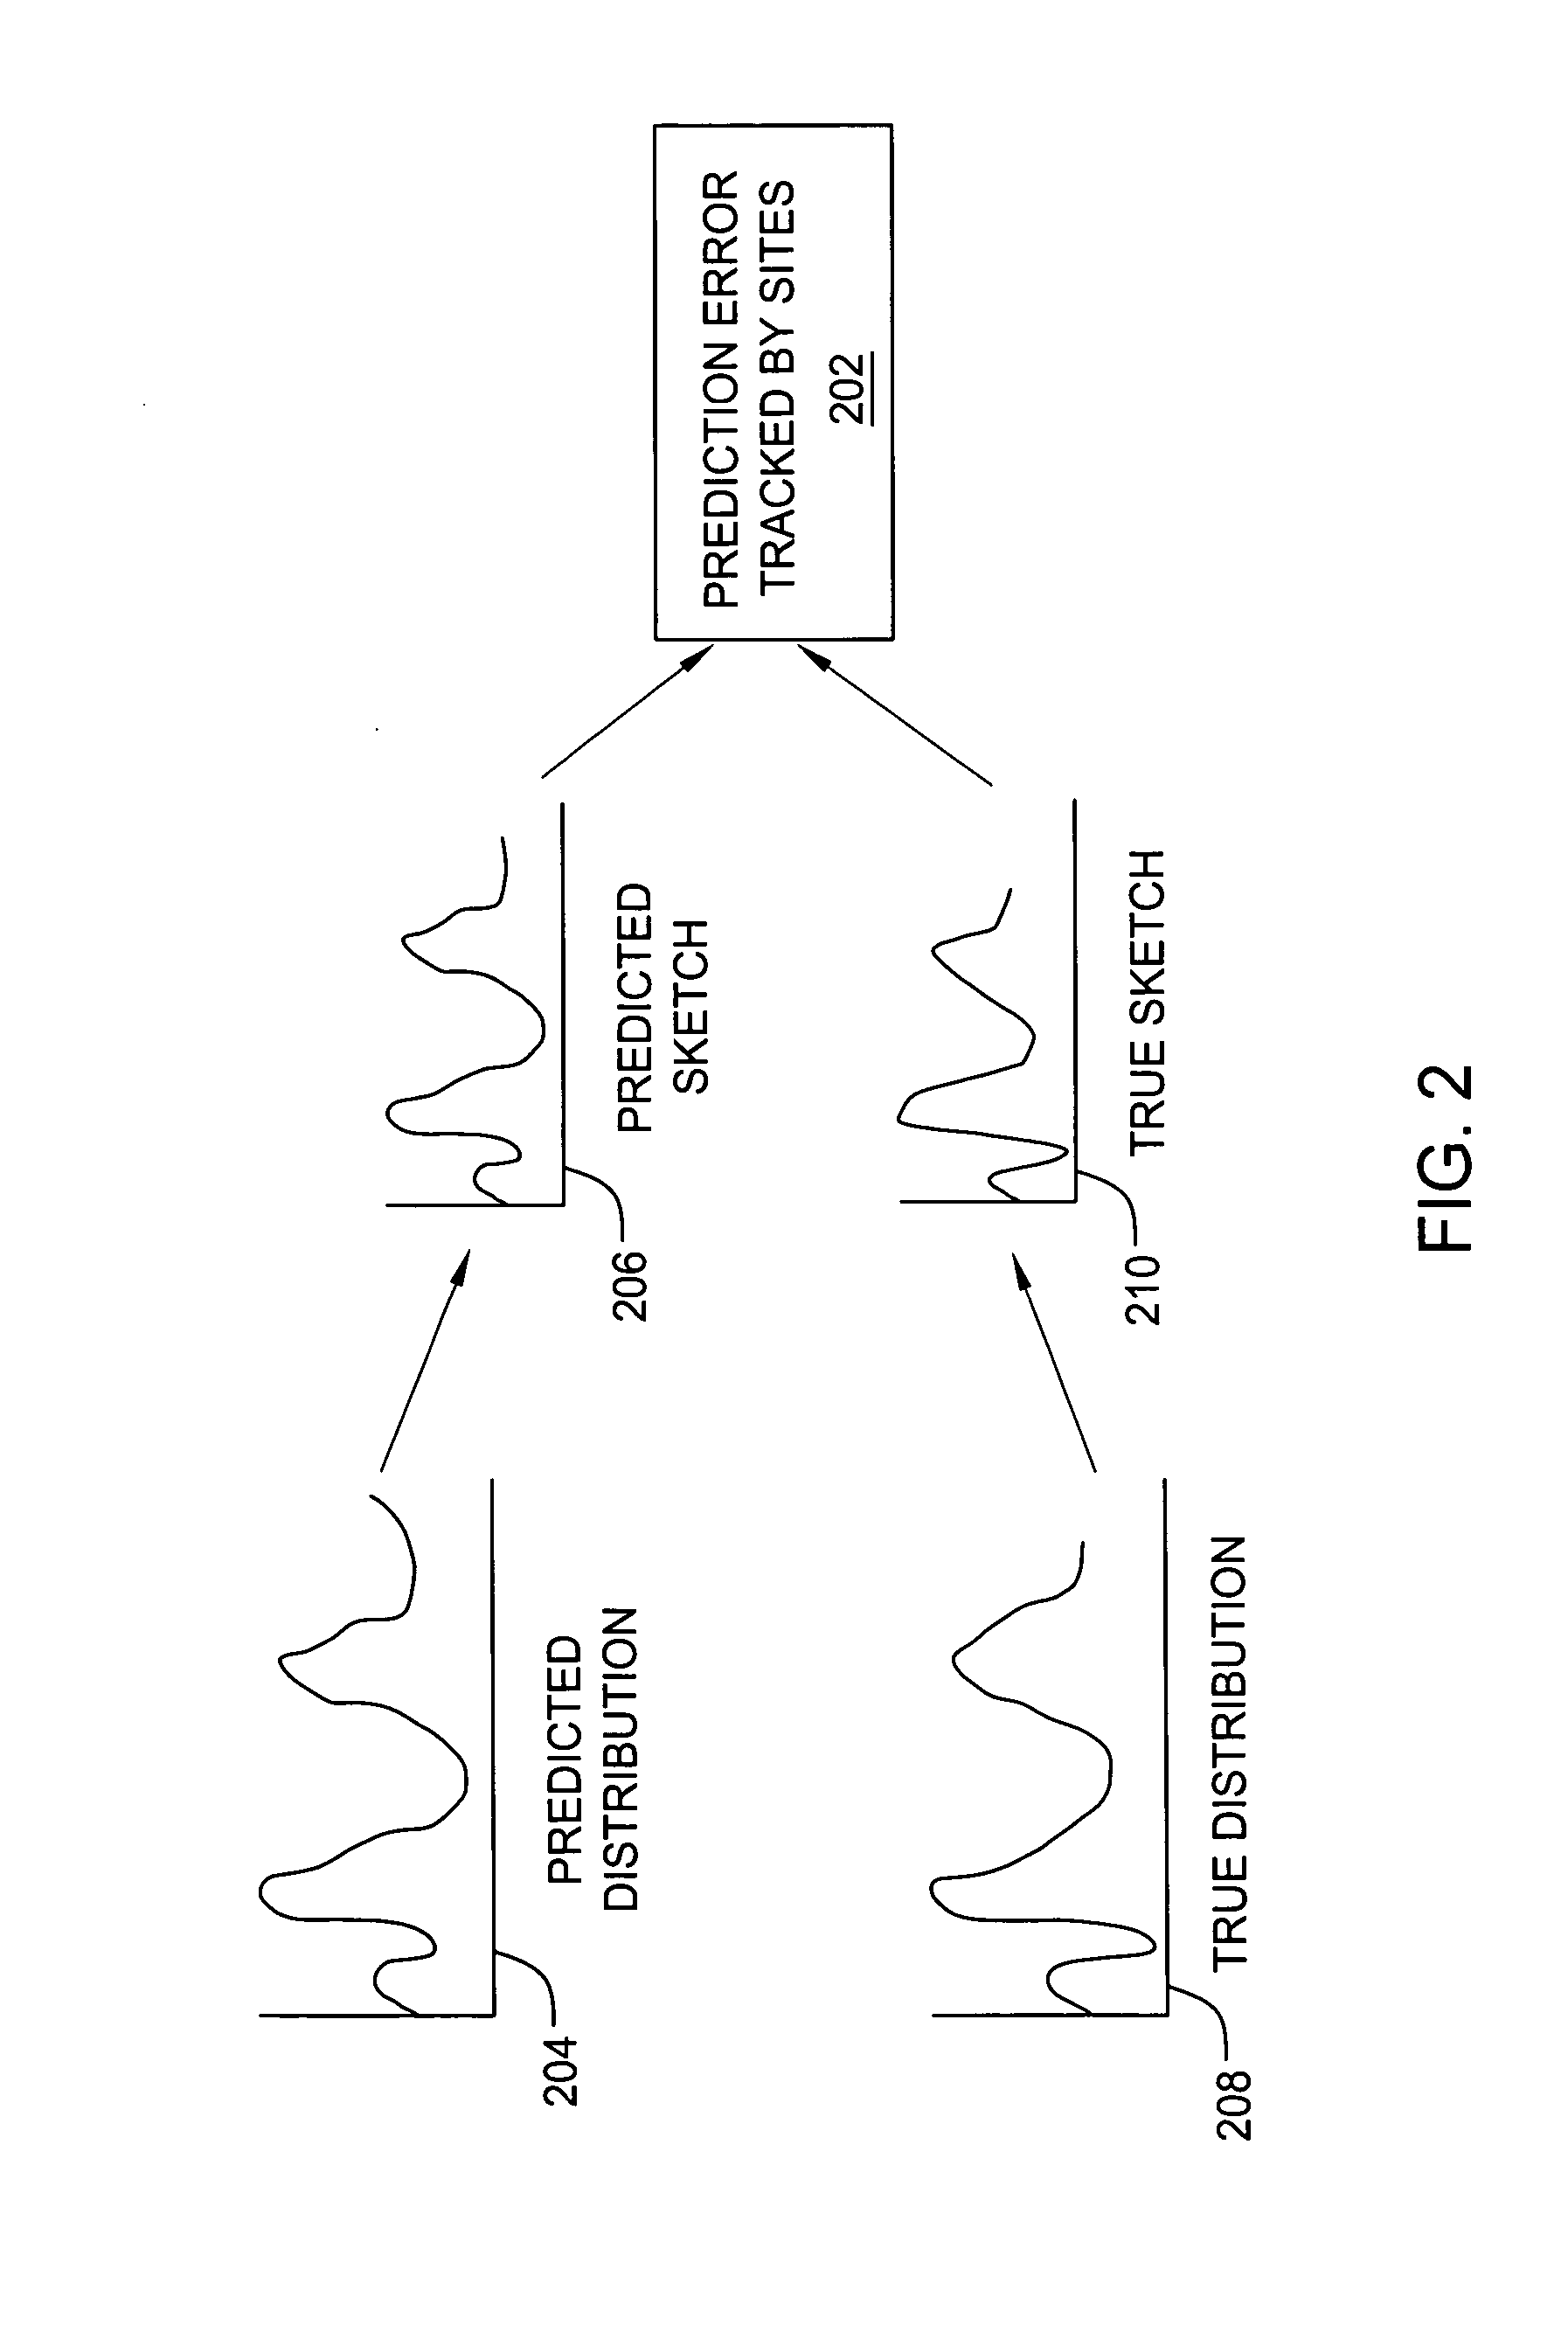 Method for distributed tracking of approximate join size and related summaries